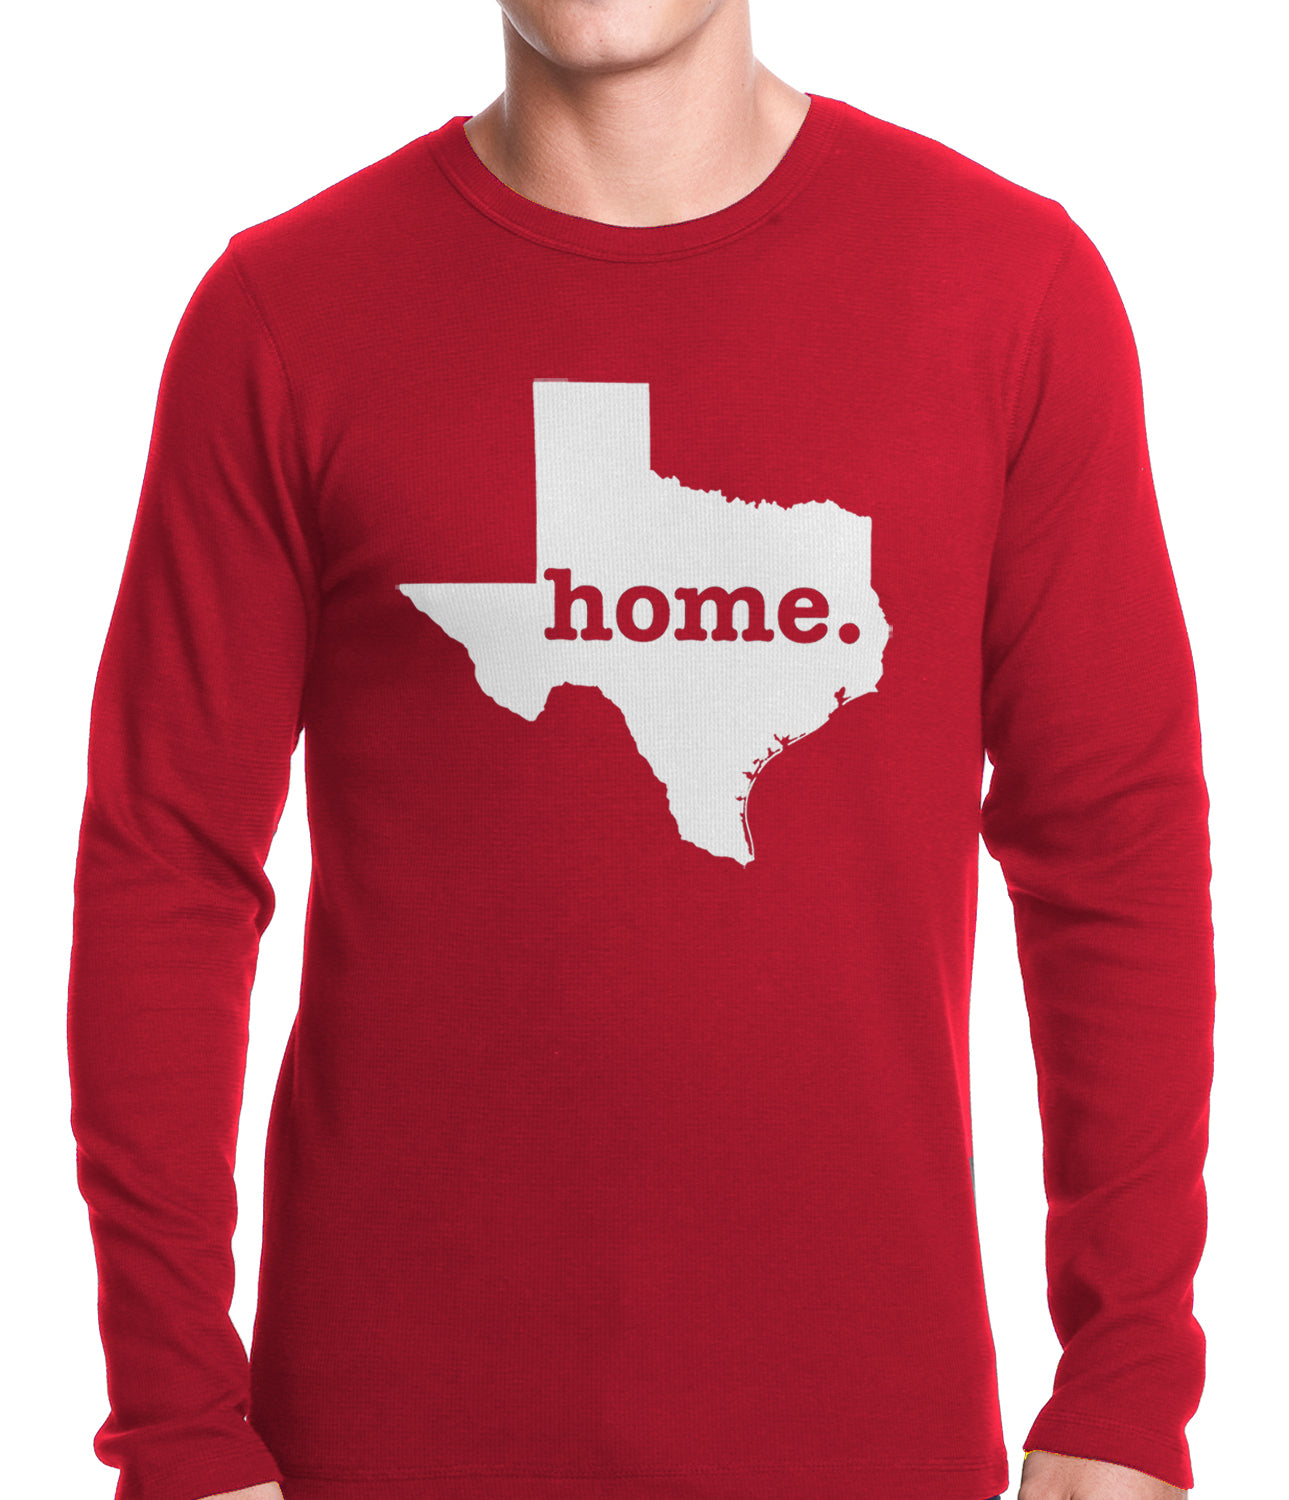 Texas is Home Thermal Shirt